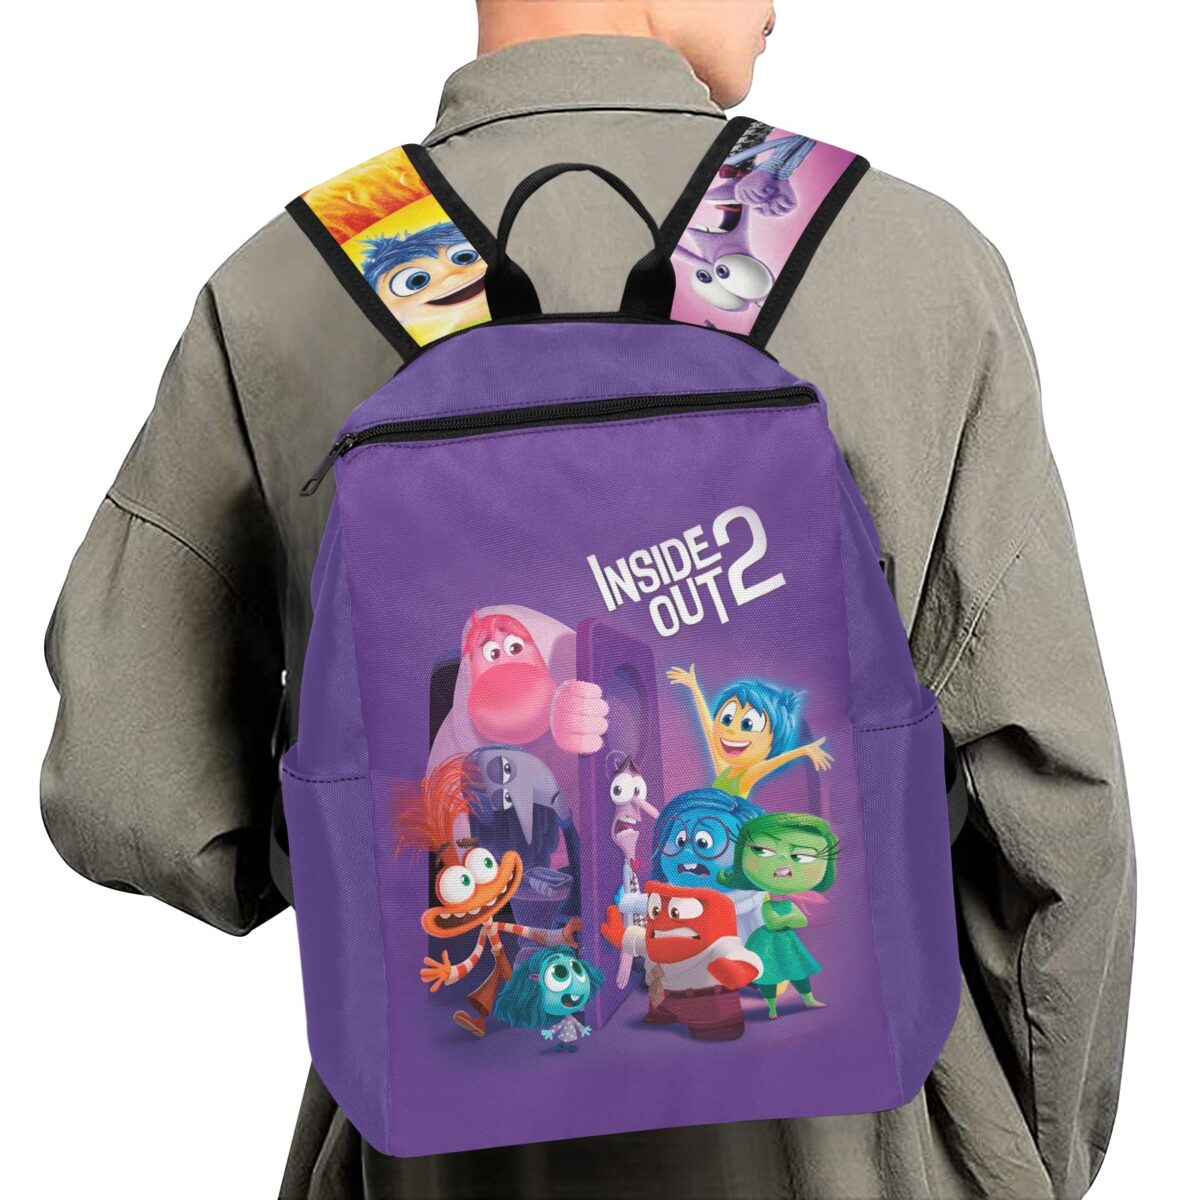 Inside Out 2 Movie Inspired Lightweight Casual Backpack – Perfect for School, Work, and Travel Cool Kiddo 12